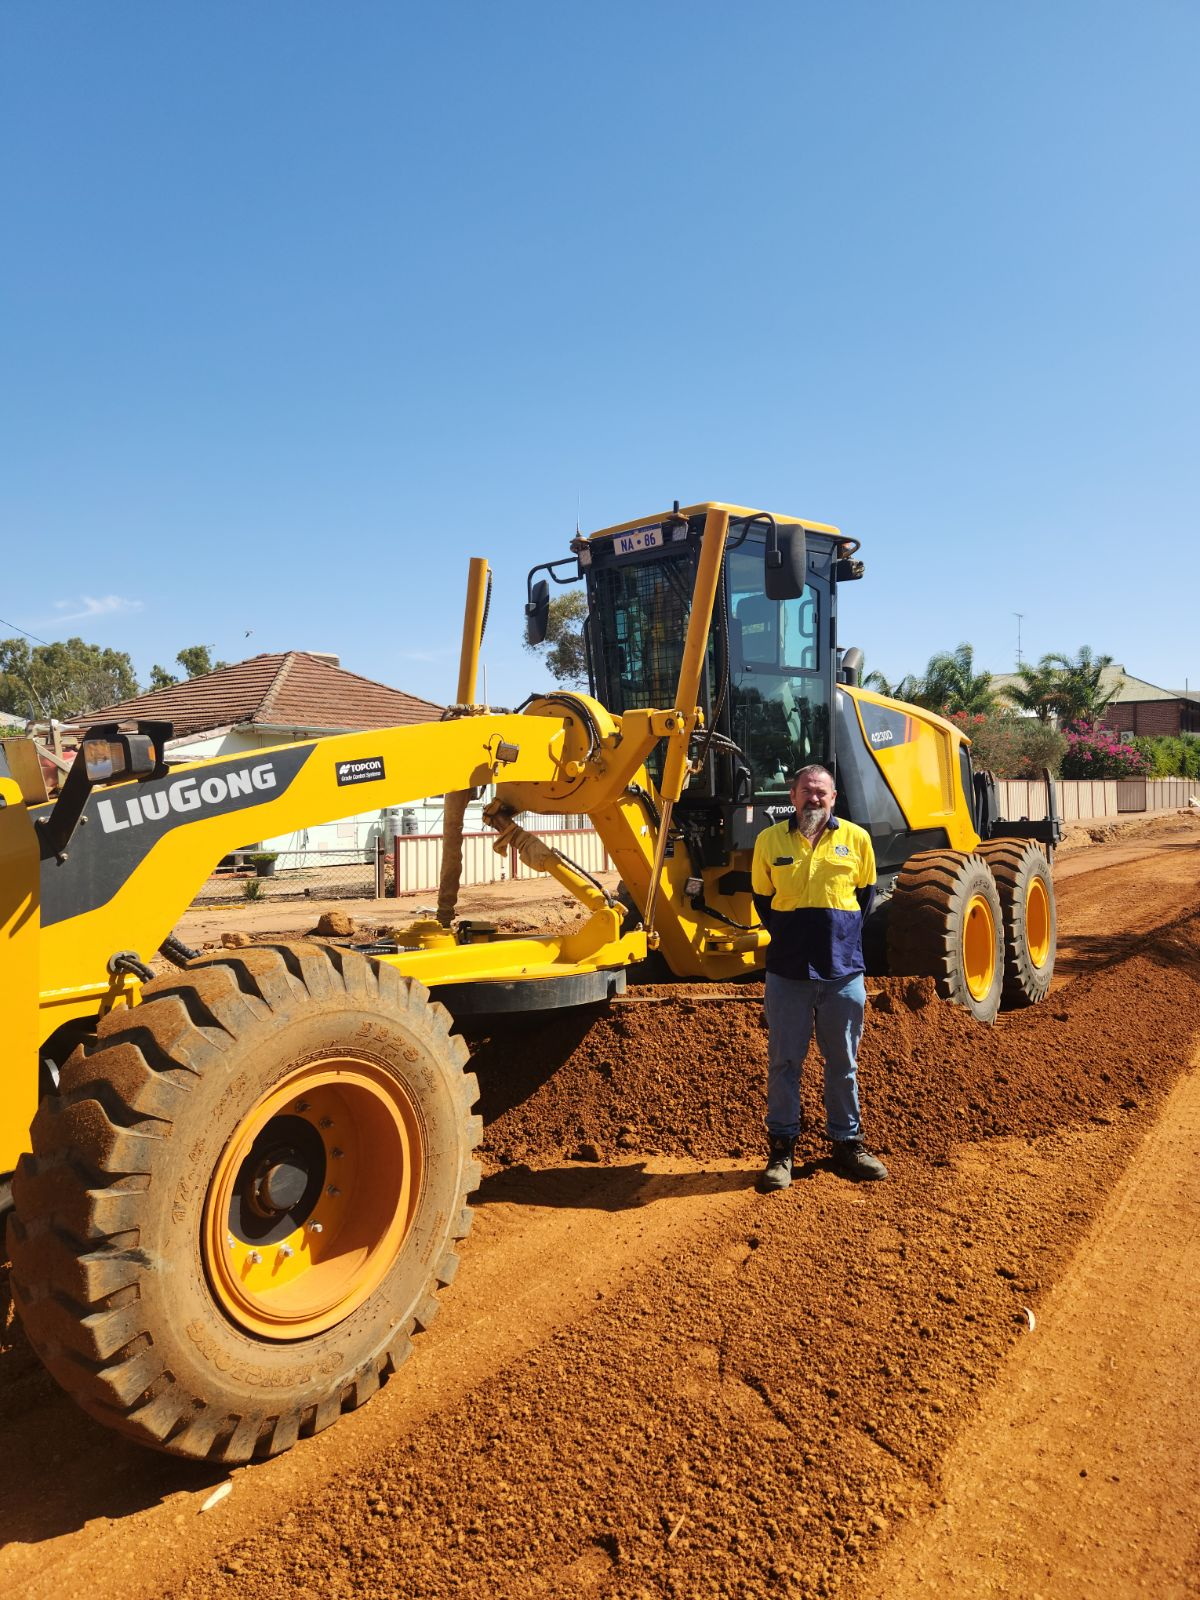 Photo caption 3: Dave Nayda, Manager Works and Services at the Shire of Nungarin in WA, says the LiuGong 4230D motor grader has shown its reliability after chalking-up more than 650 hours and the shire’s machine operators are extremely happy with it.